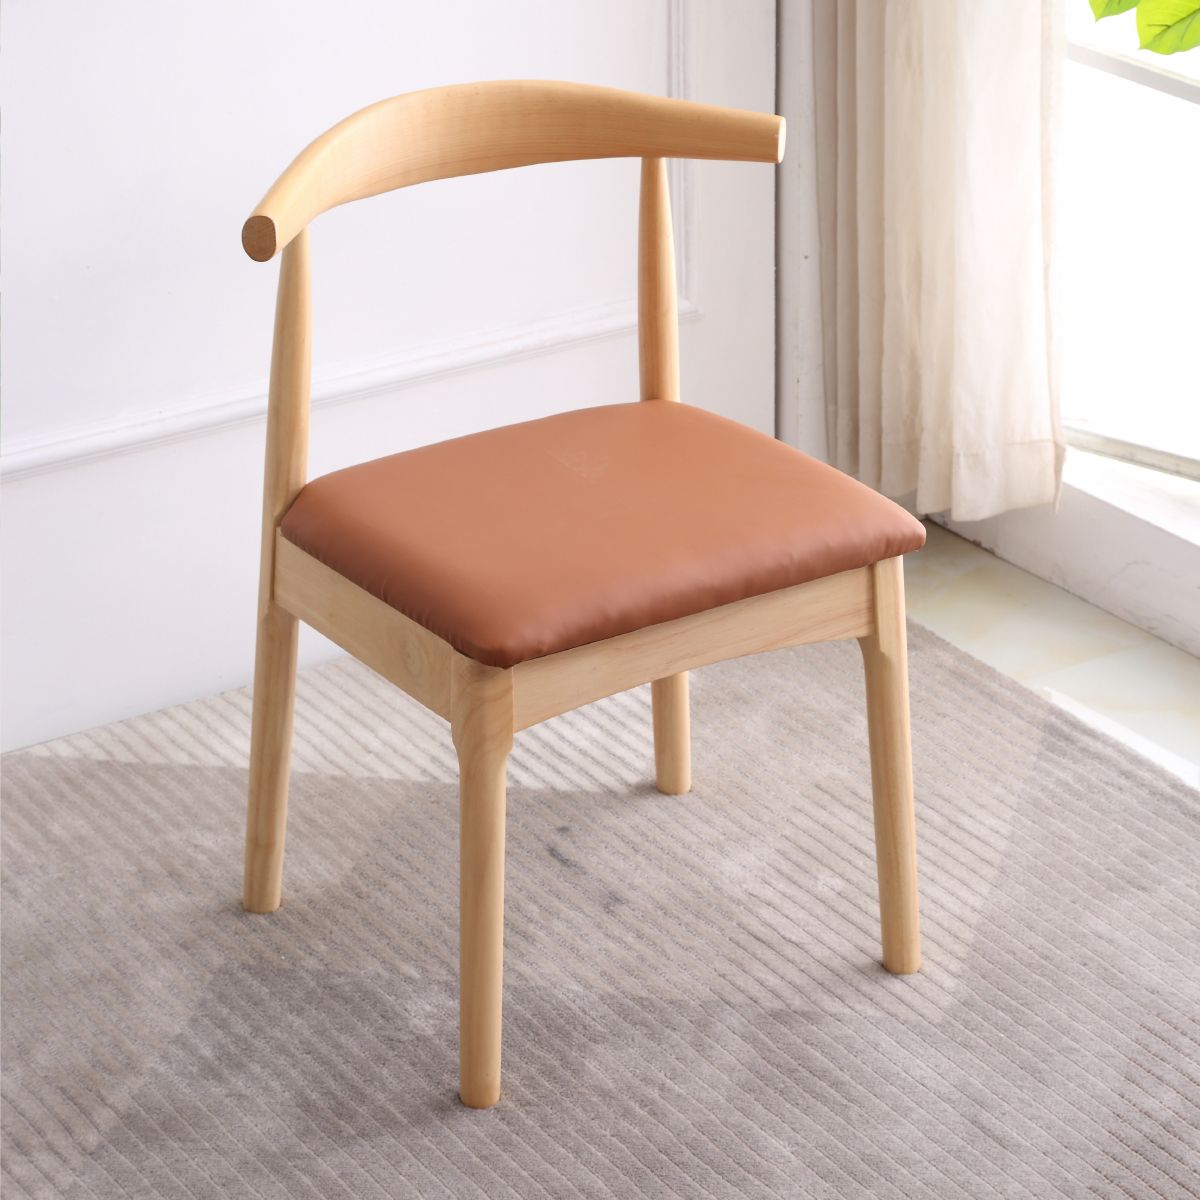 Indoor Scandinavian Side Chair Open Back Upholstered Wood Dining Room Chair